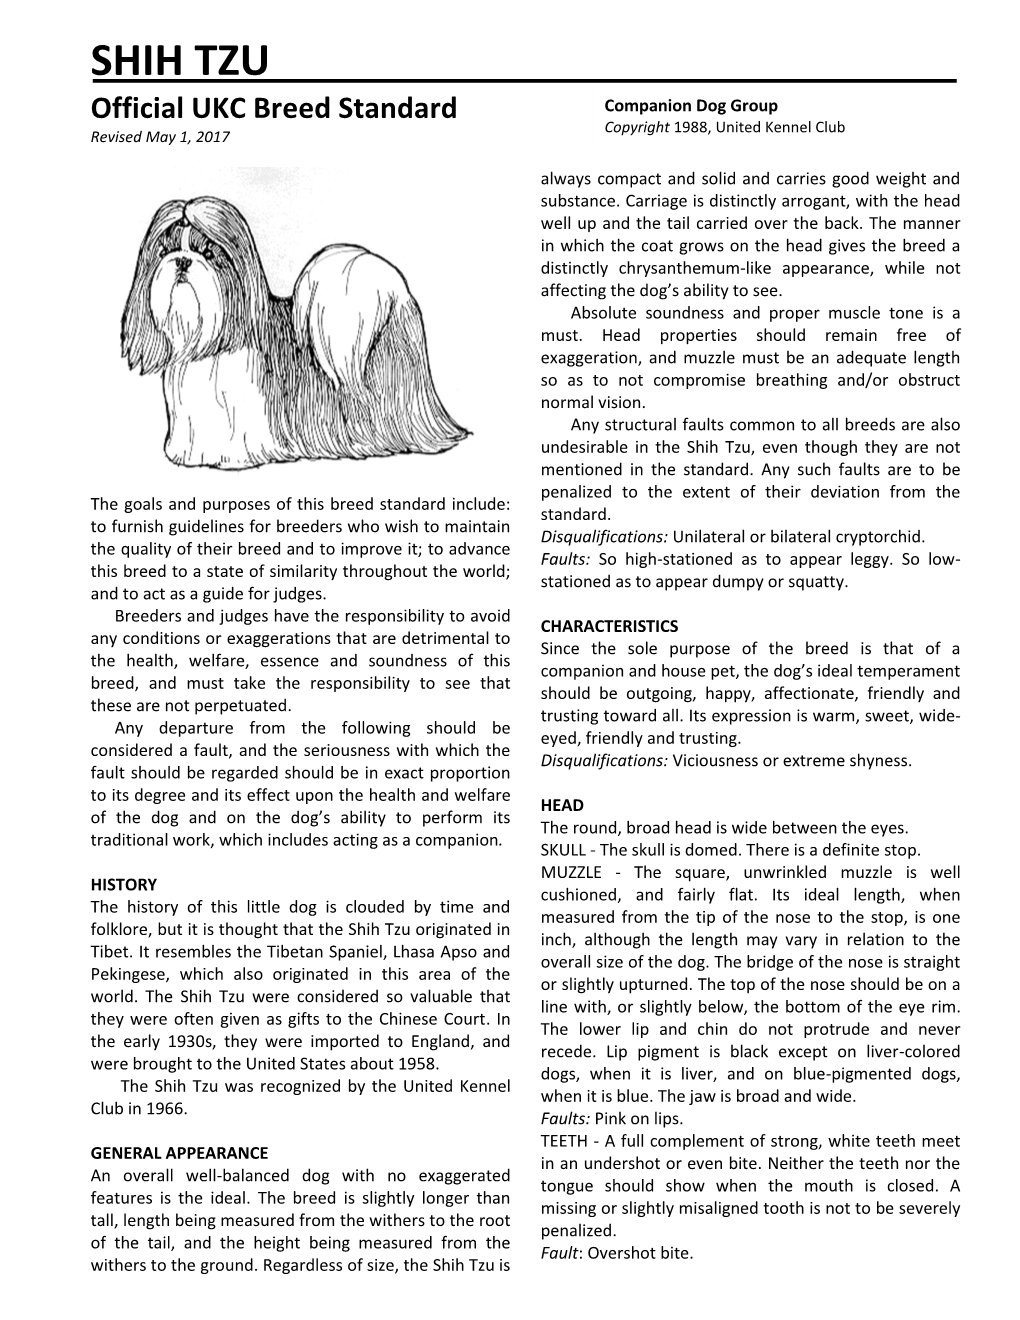 SHIH TZU Official UKC Breed Standard Companion Dog Group Copyright 1988, United Kennel Club Revised May 1, 2017